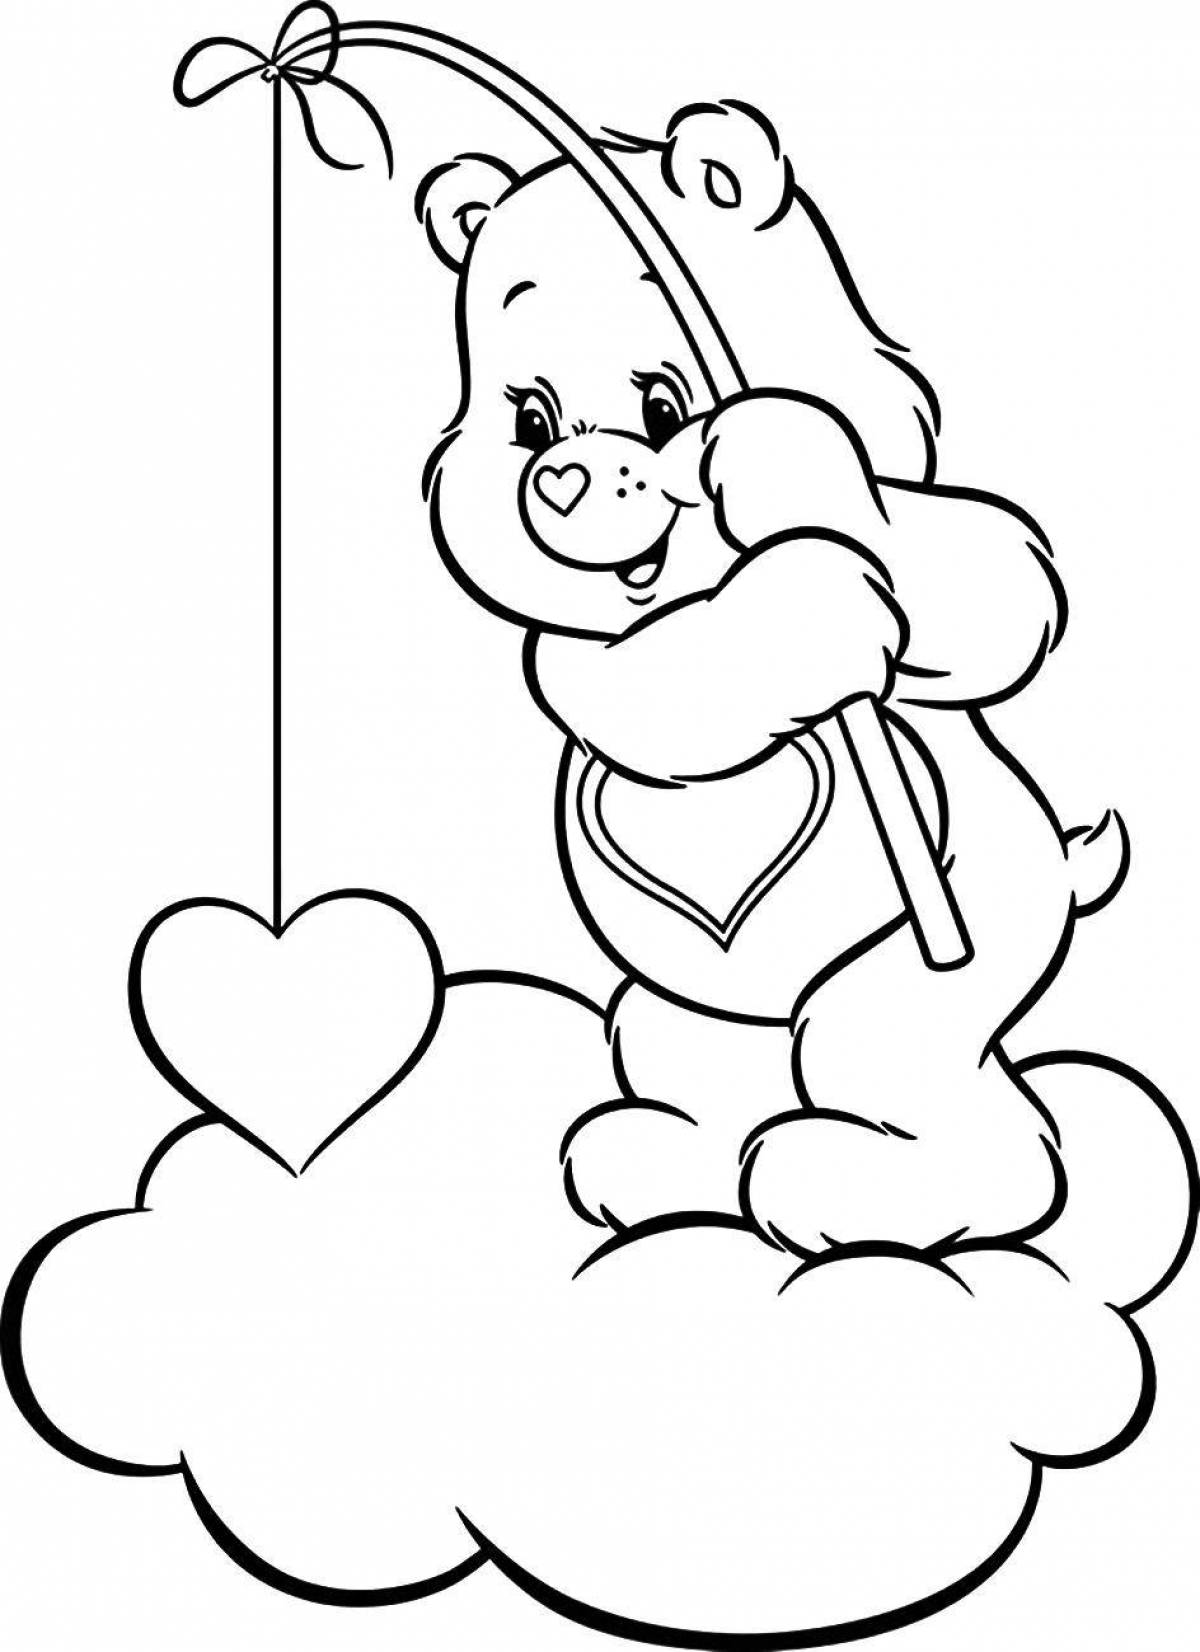 Adorable bunny coloring book with a heart